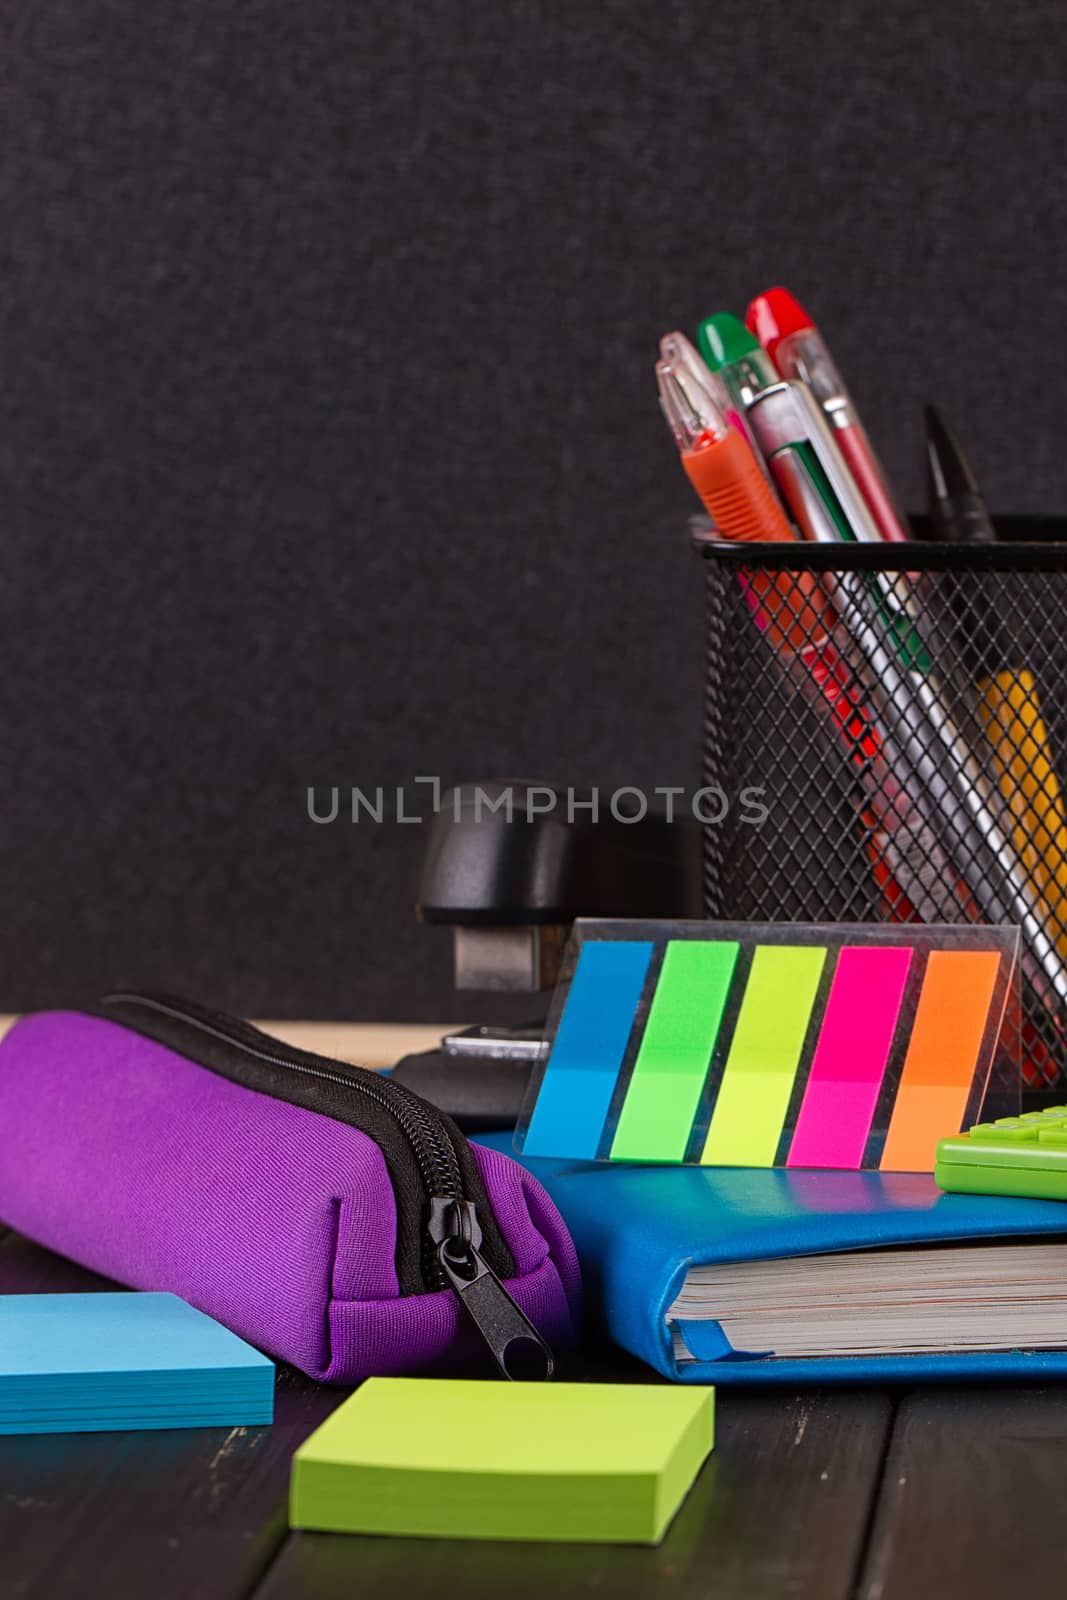 Stationery: pens, pen holder, diary on a black background